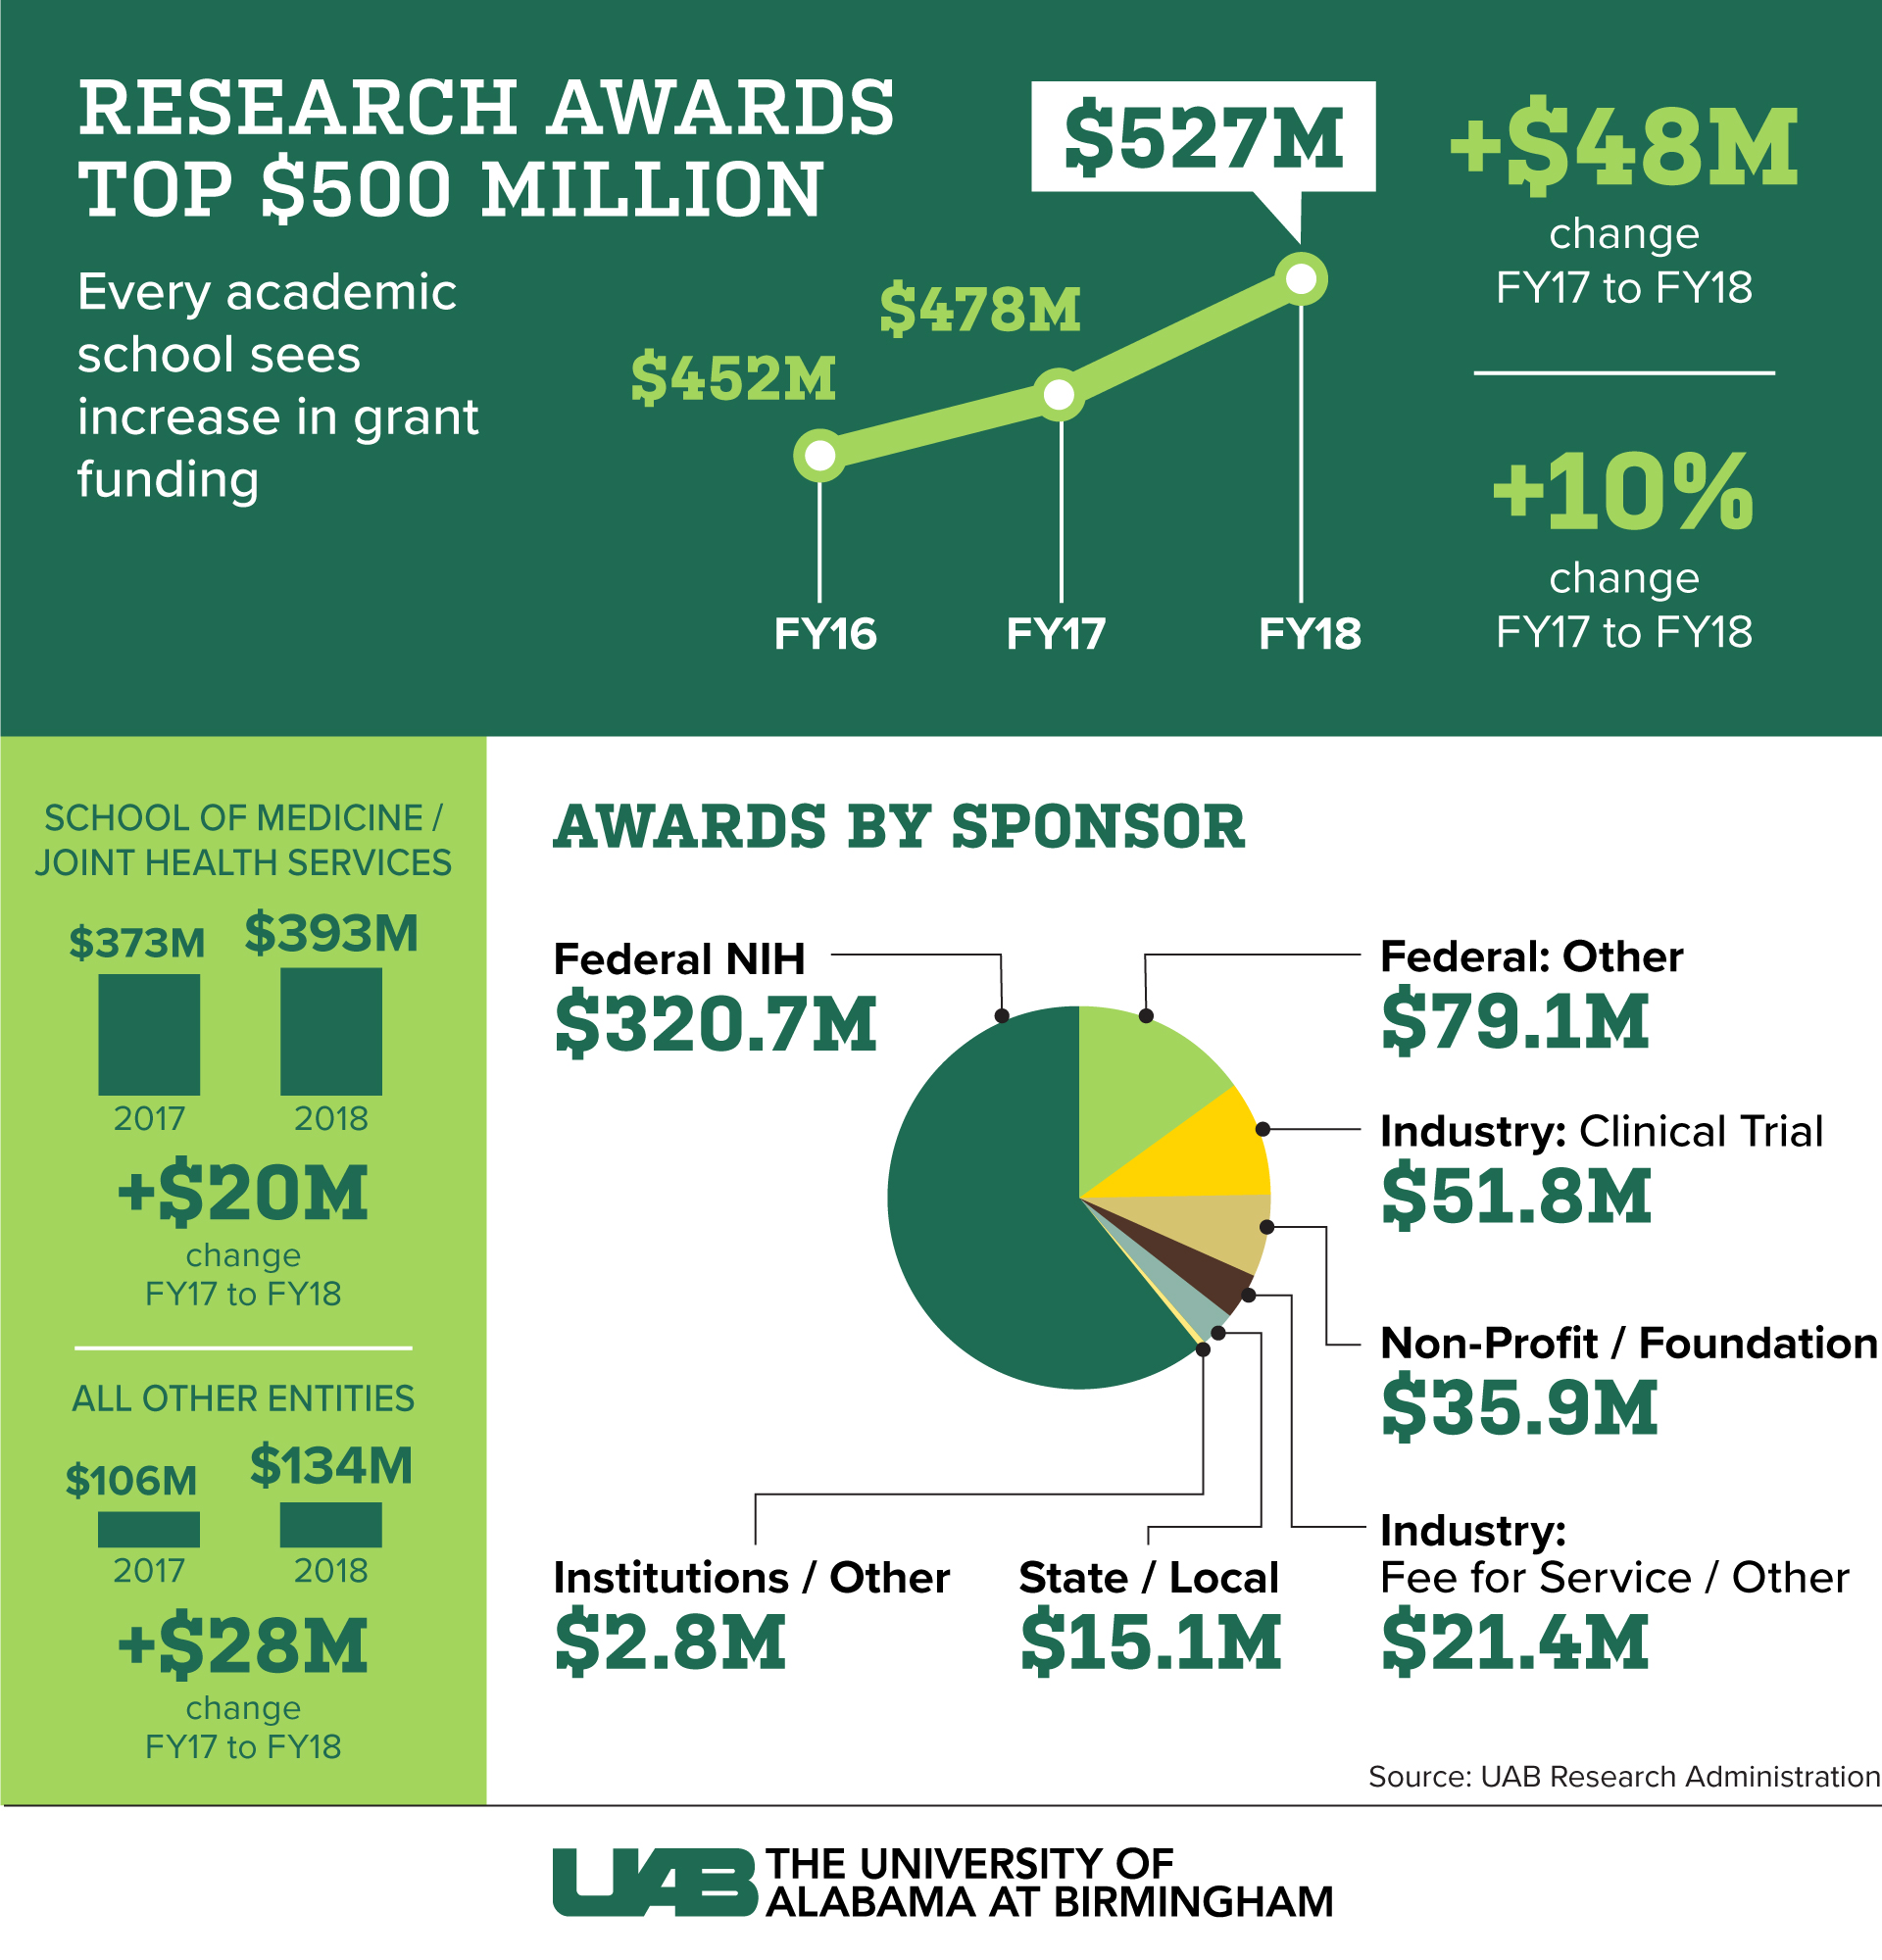 Research Funding totals